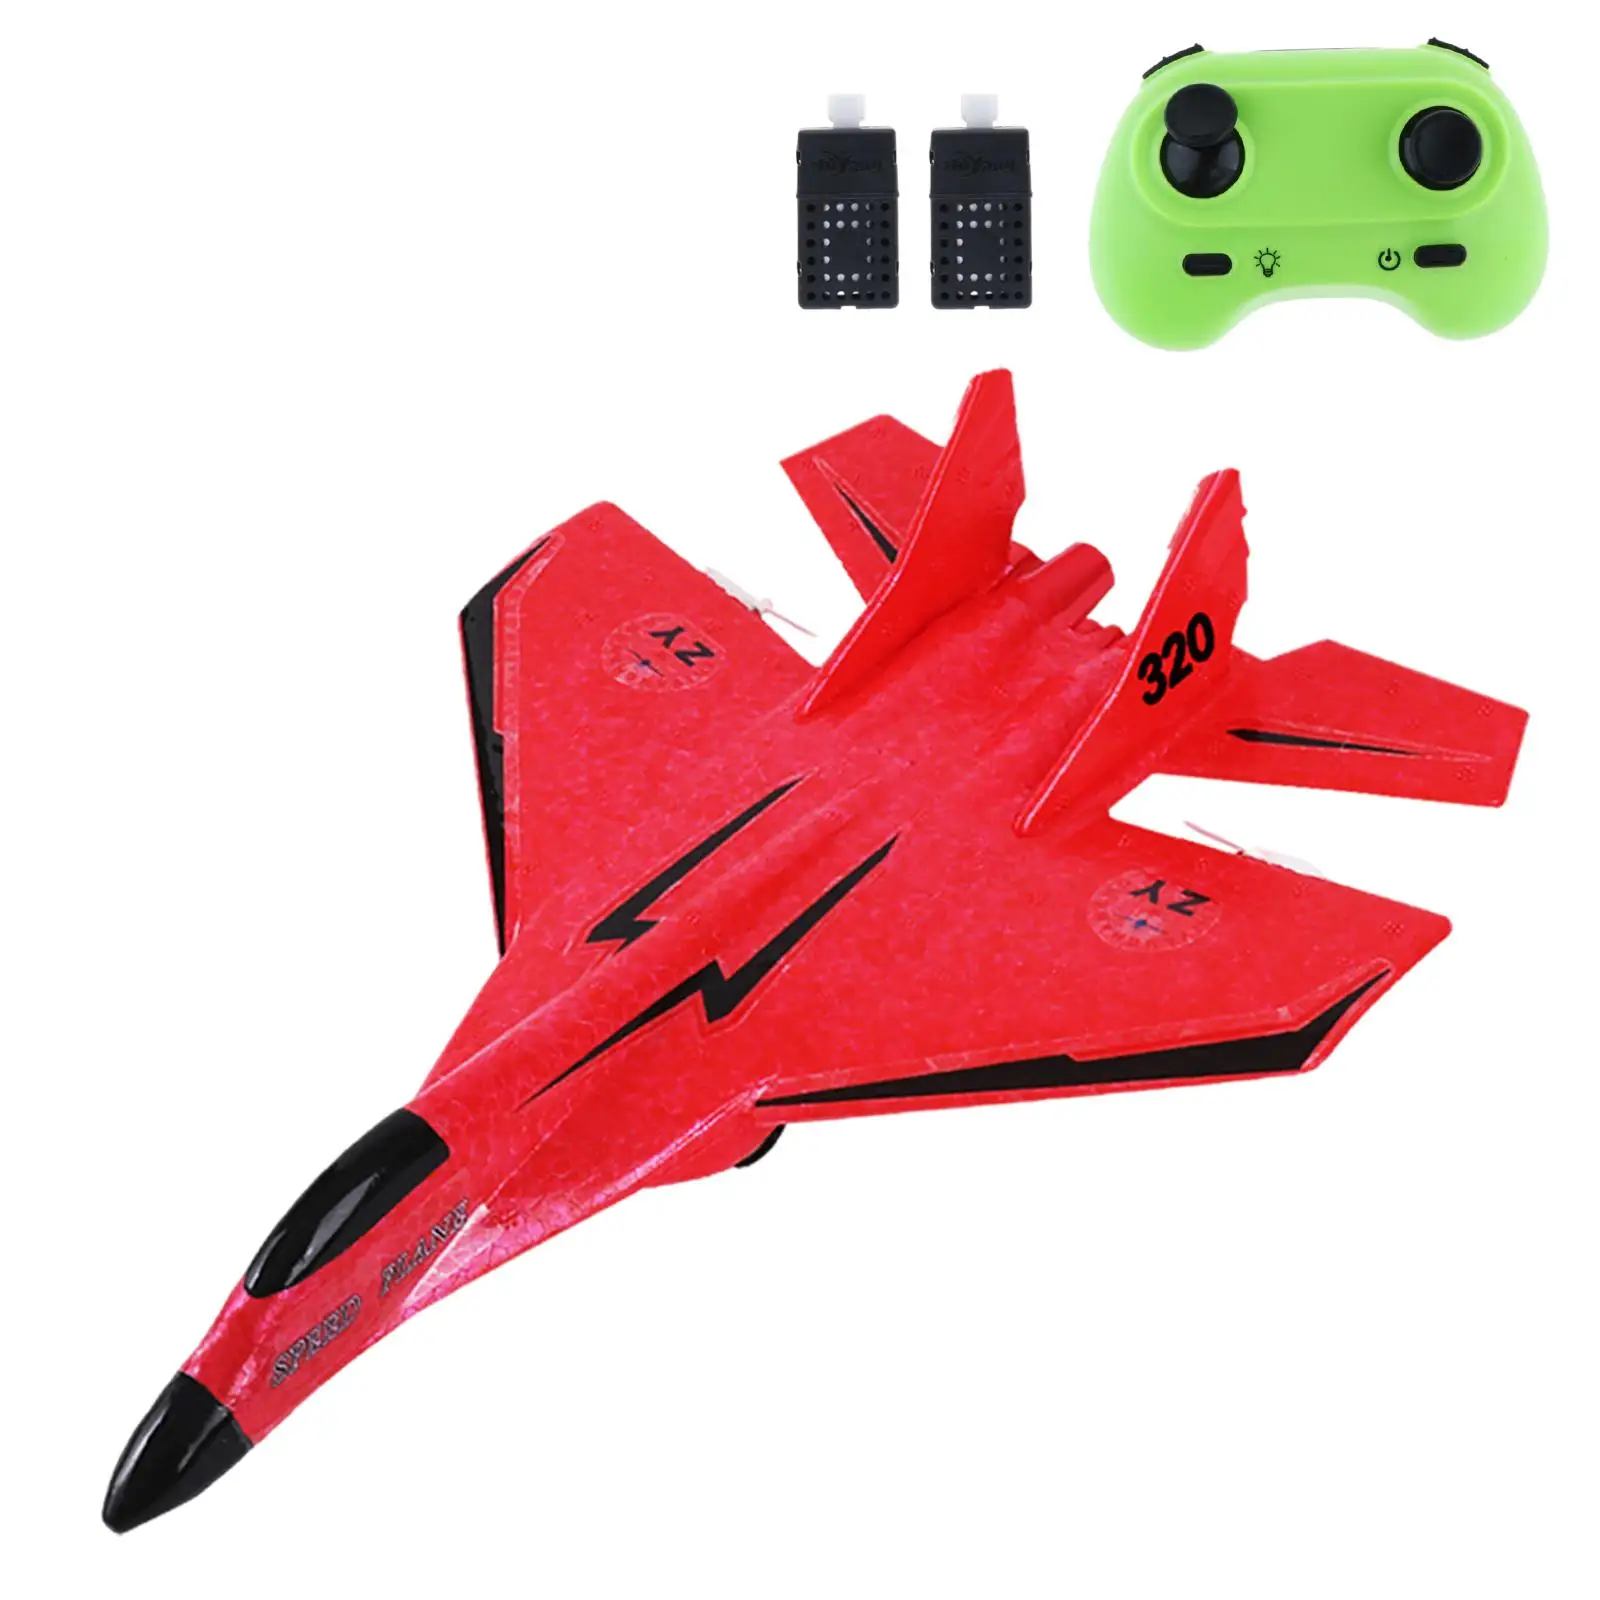 2 CH RC Planes Easy to Control Lightweight 2.4G 2 Channel RC Glider for Kids